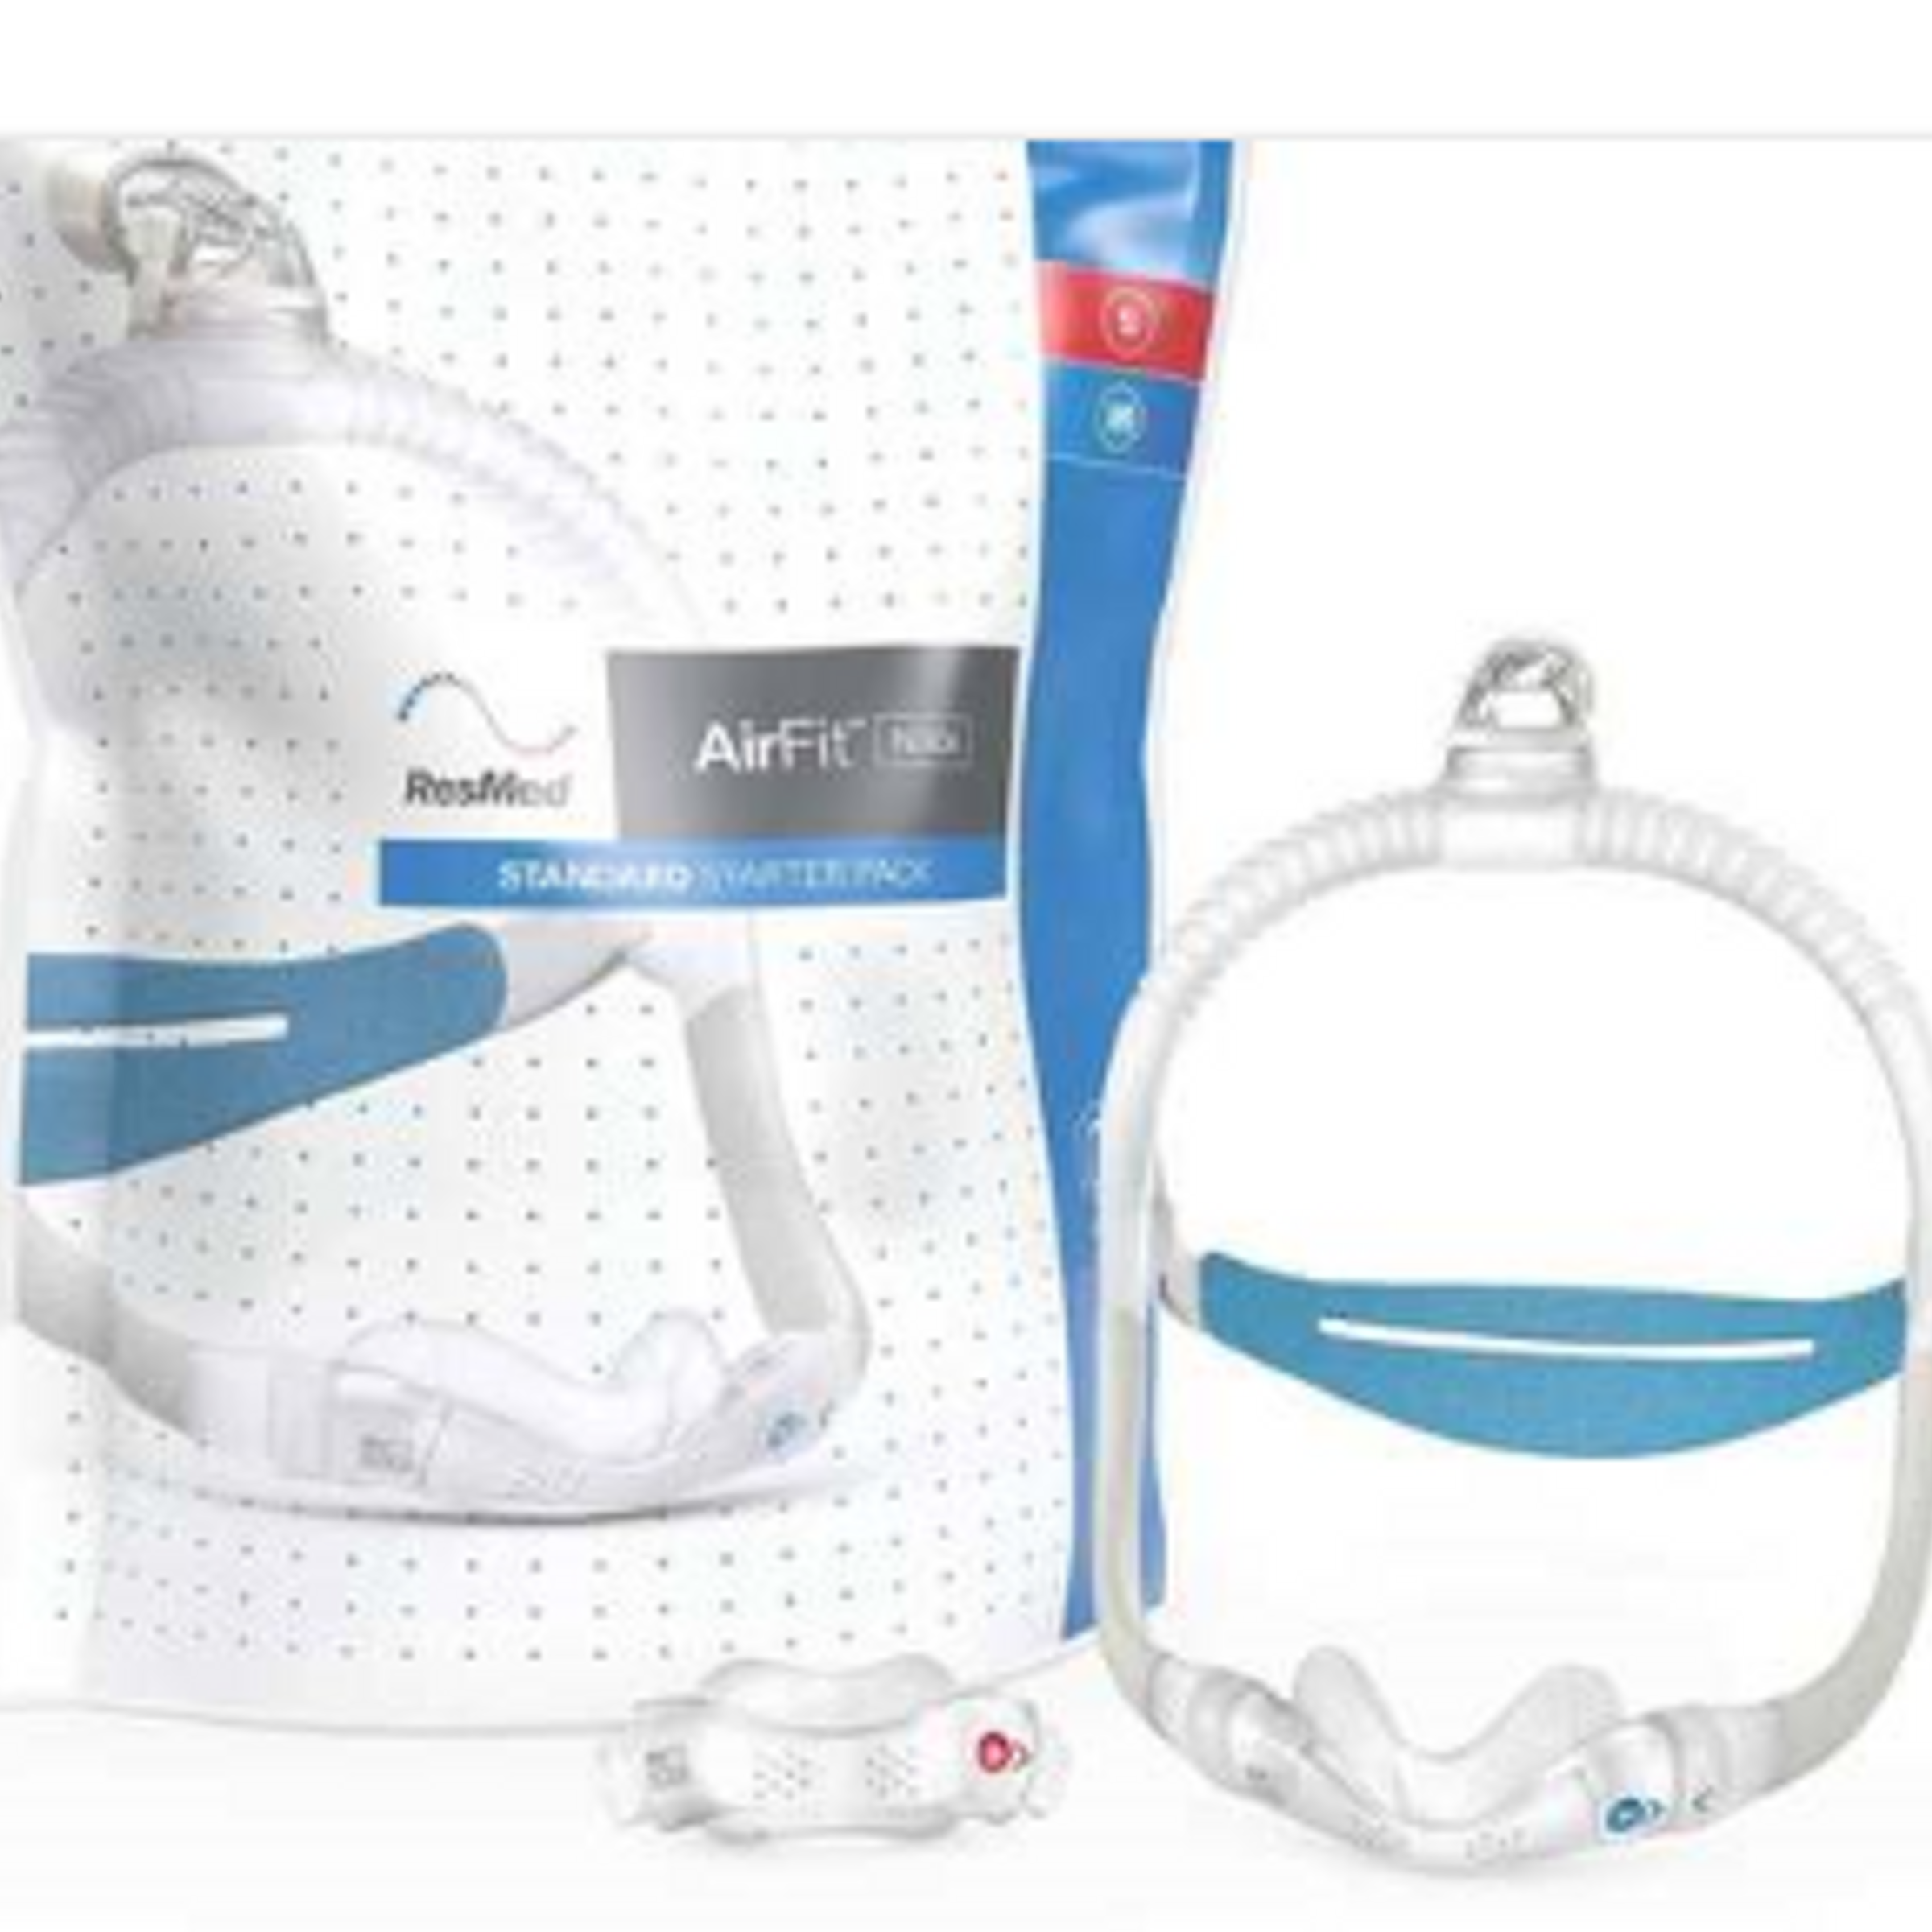 A product photo of the AirFit N30i Nasal Cradle Mask